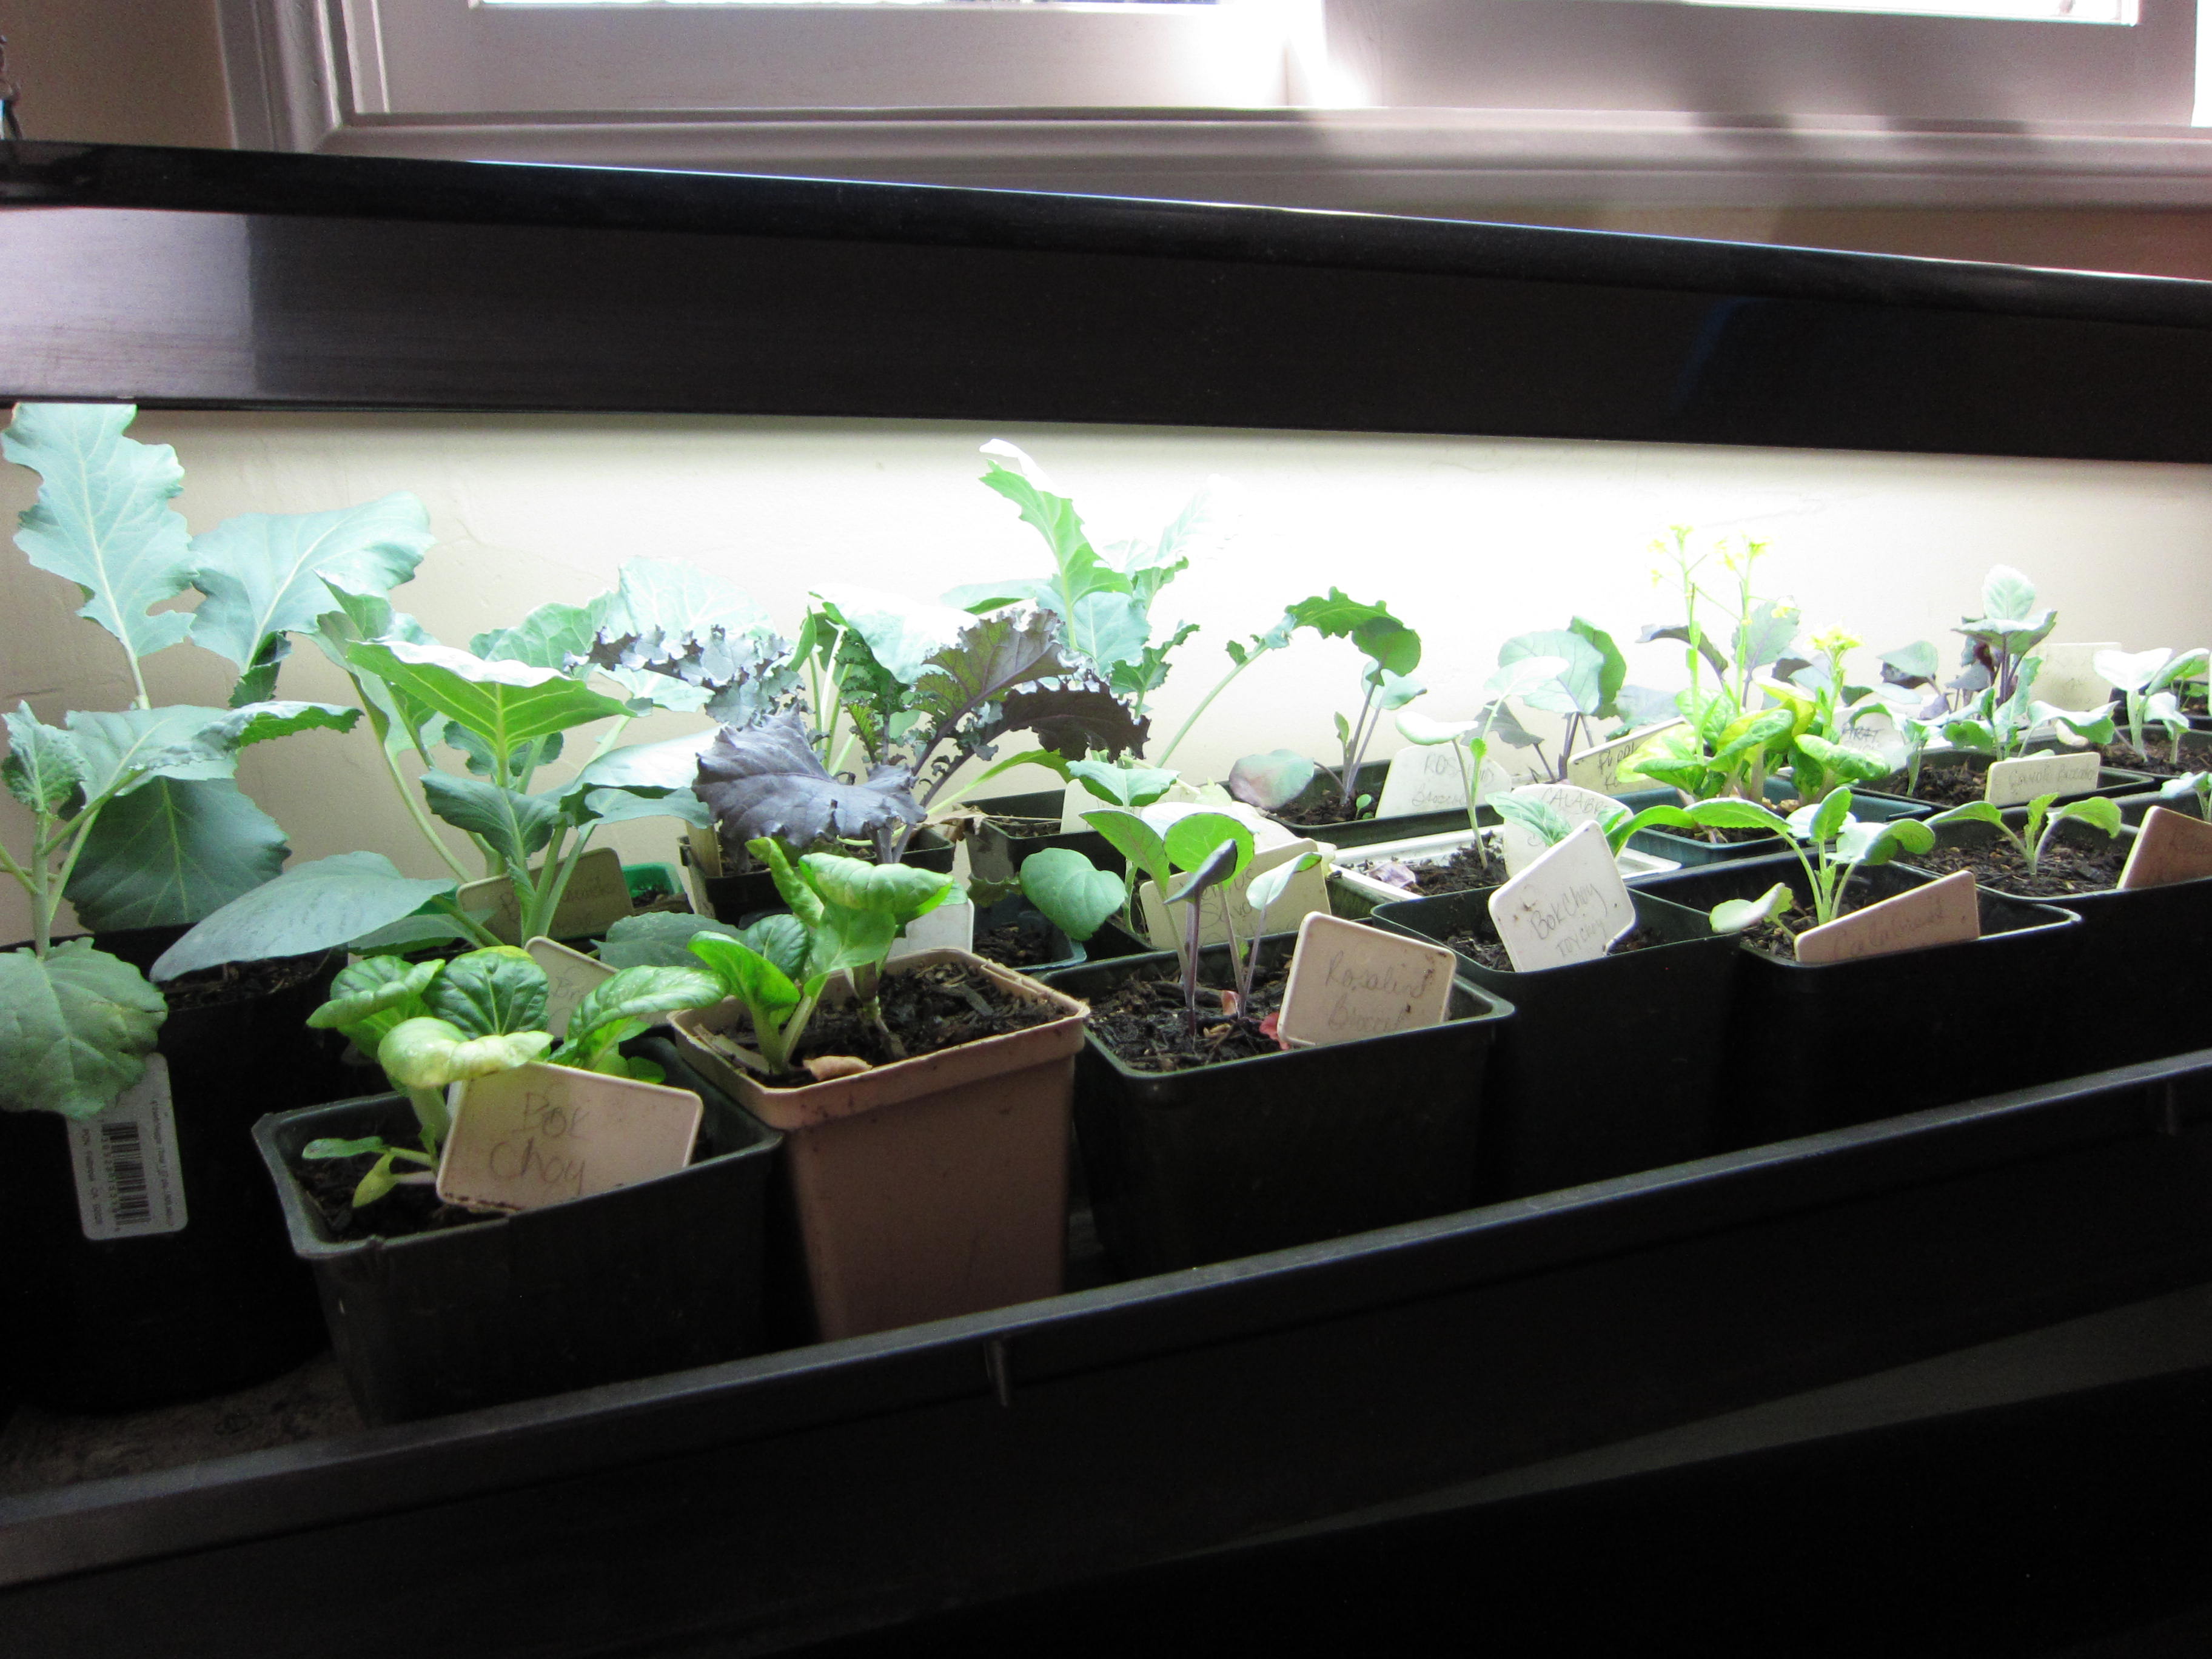 Broccoli, cabbage, bok choy and herbs are ready to go in the ground.